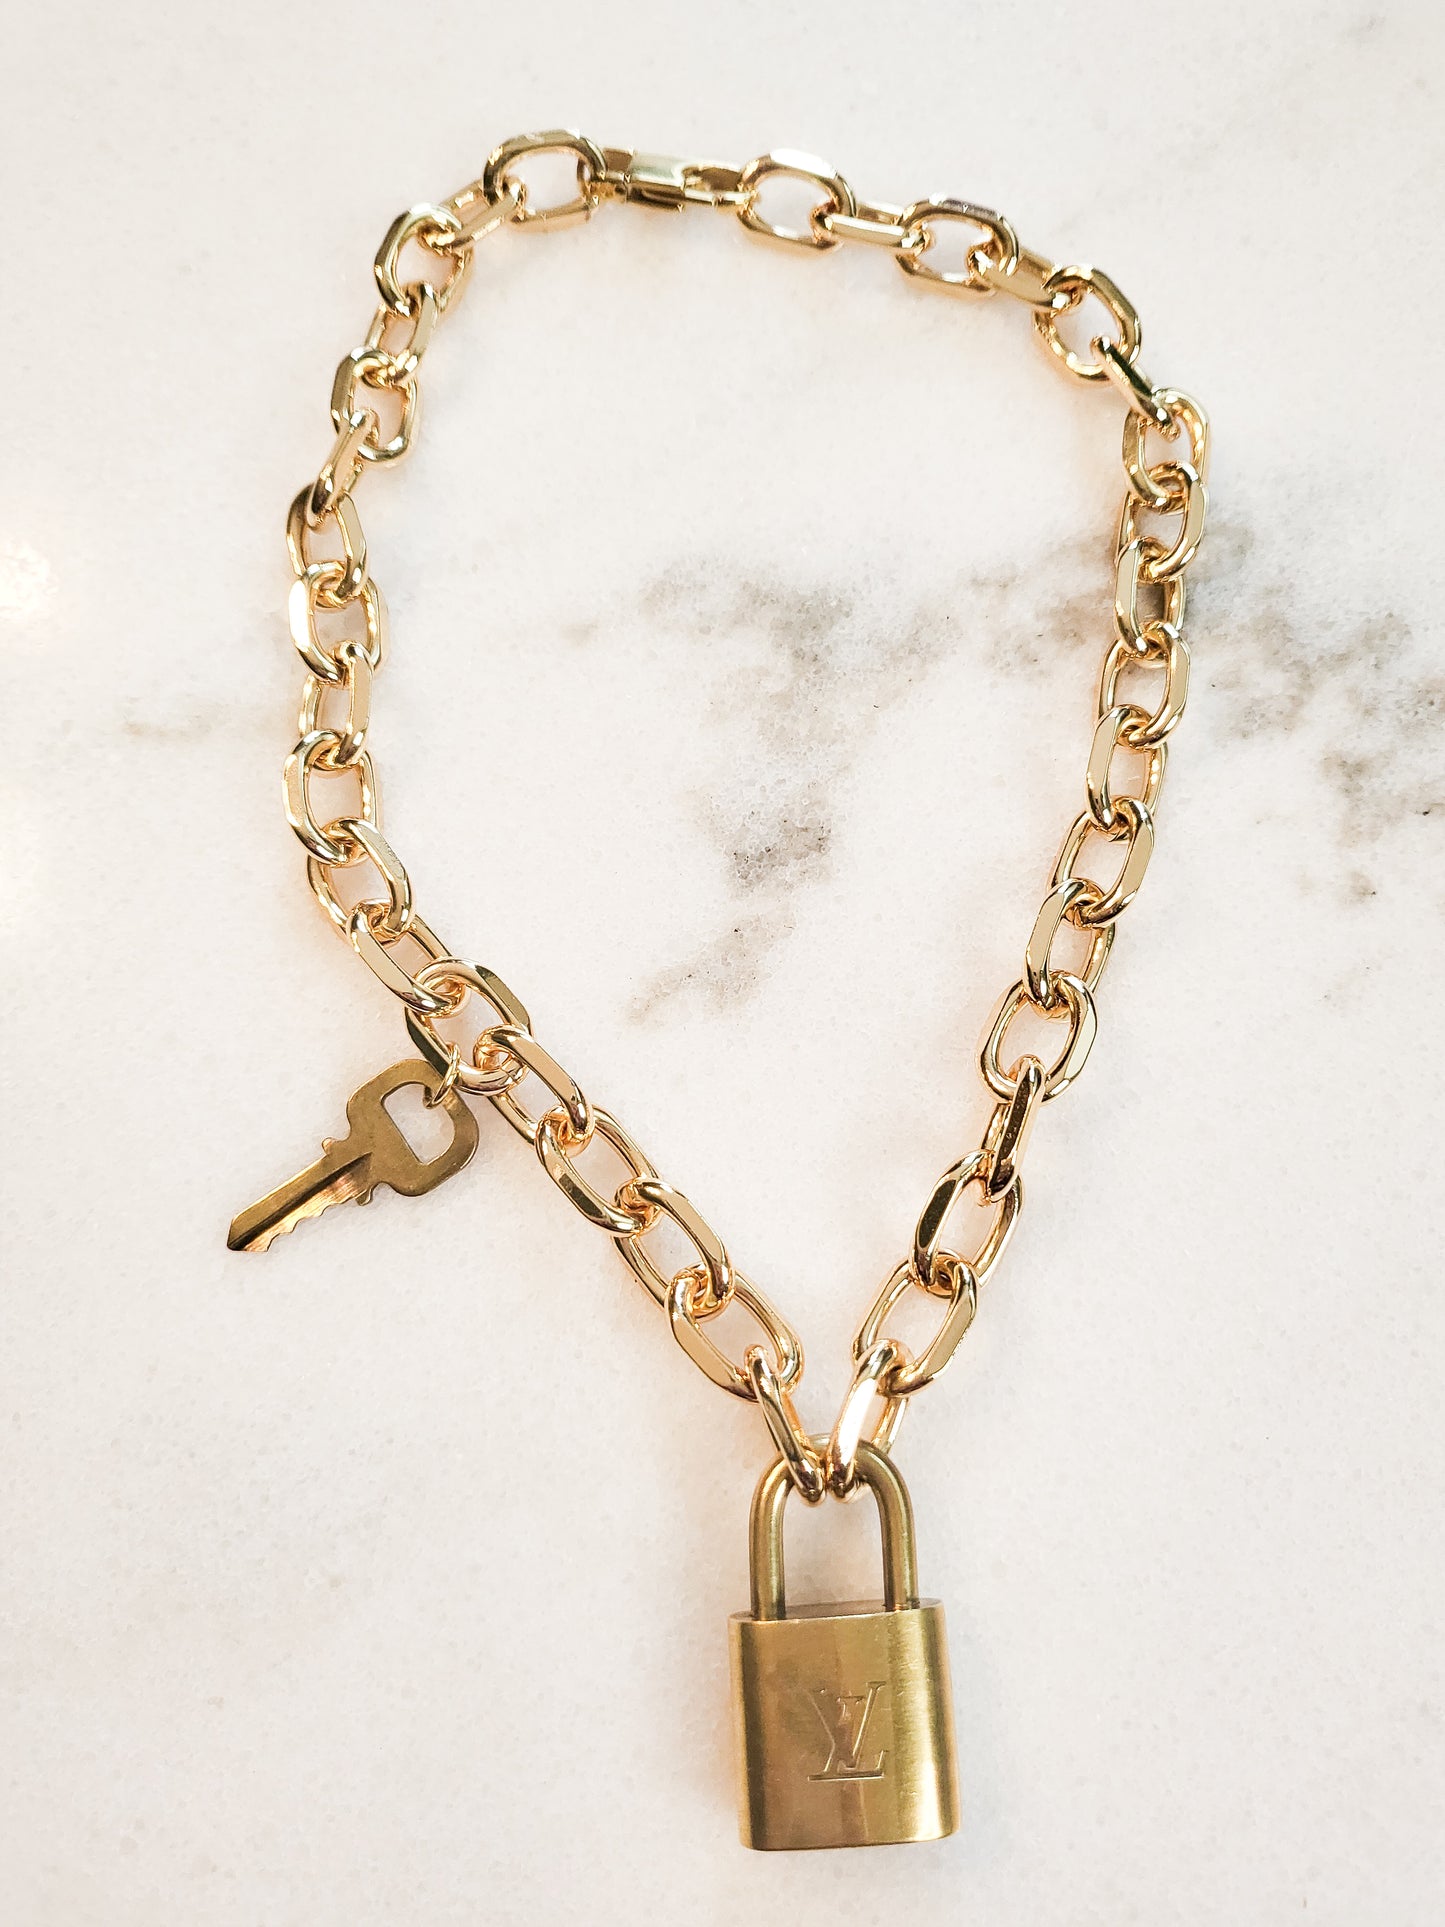 louis vuitton lock and key